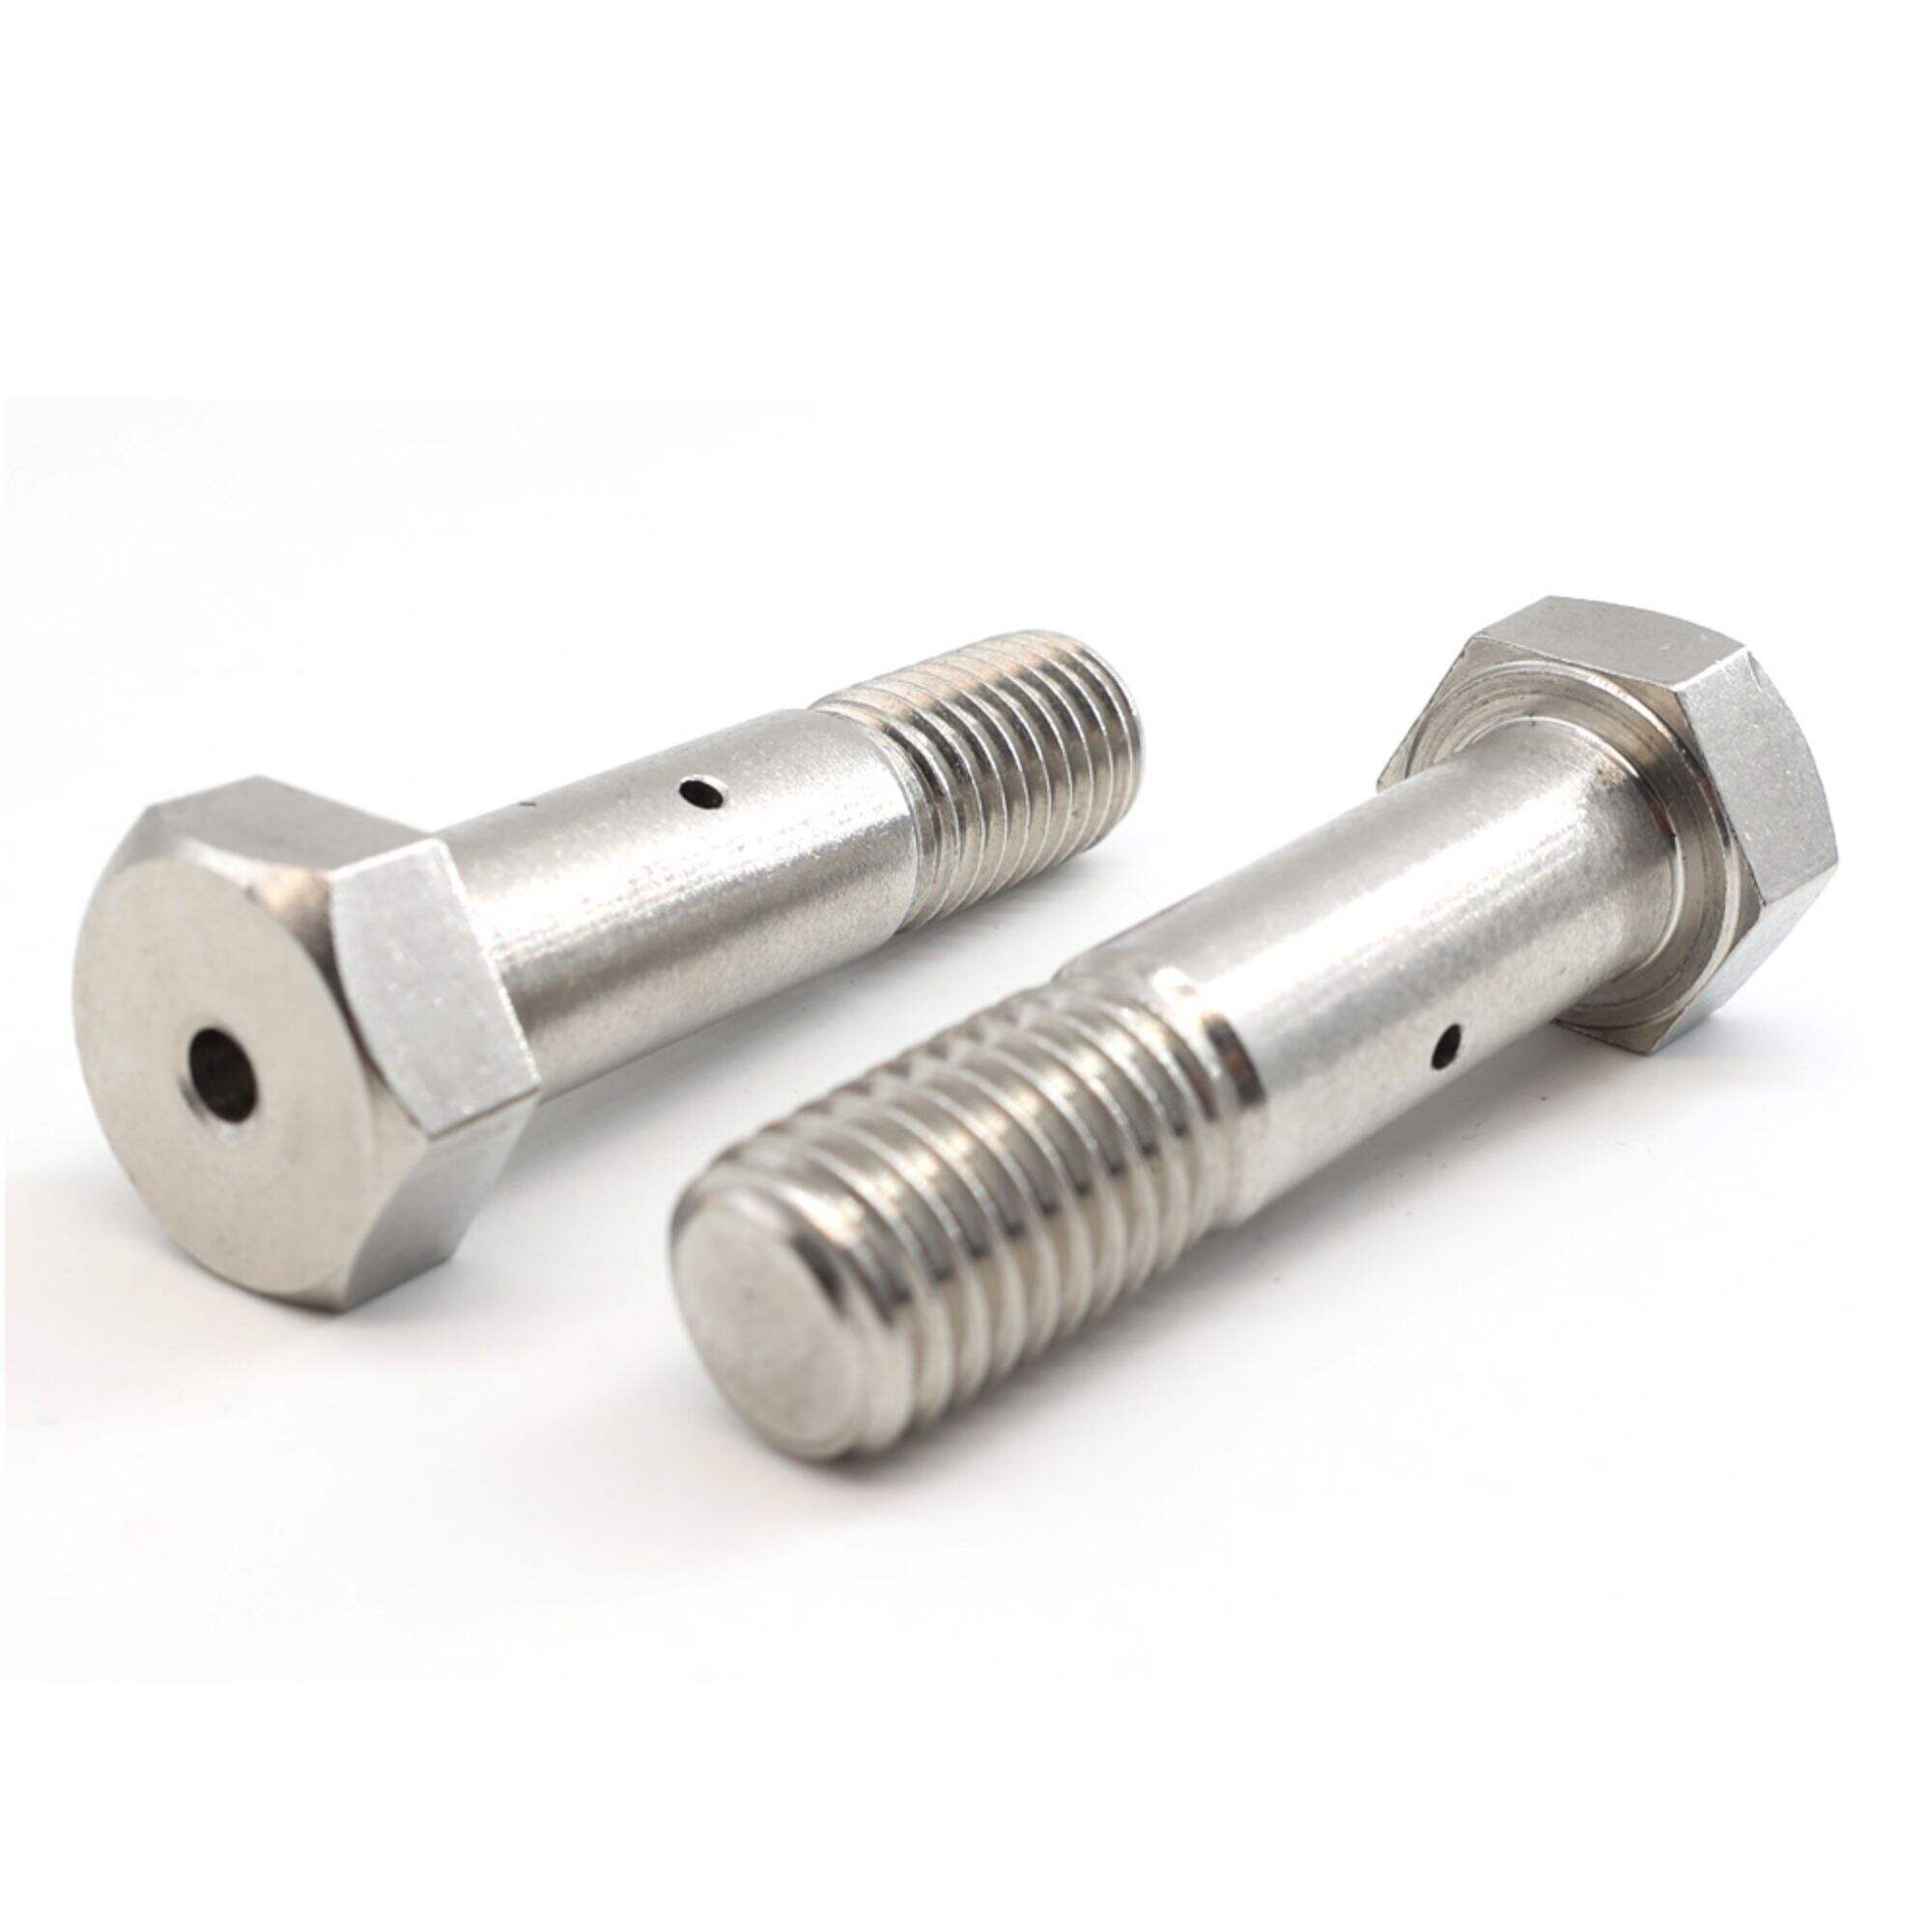 Metric M20 Din 933 M6x16 With Hole Hex Head Bolt 